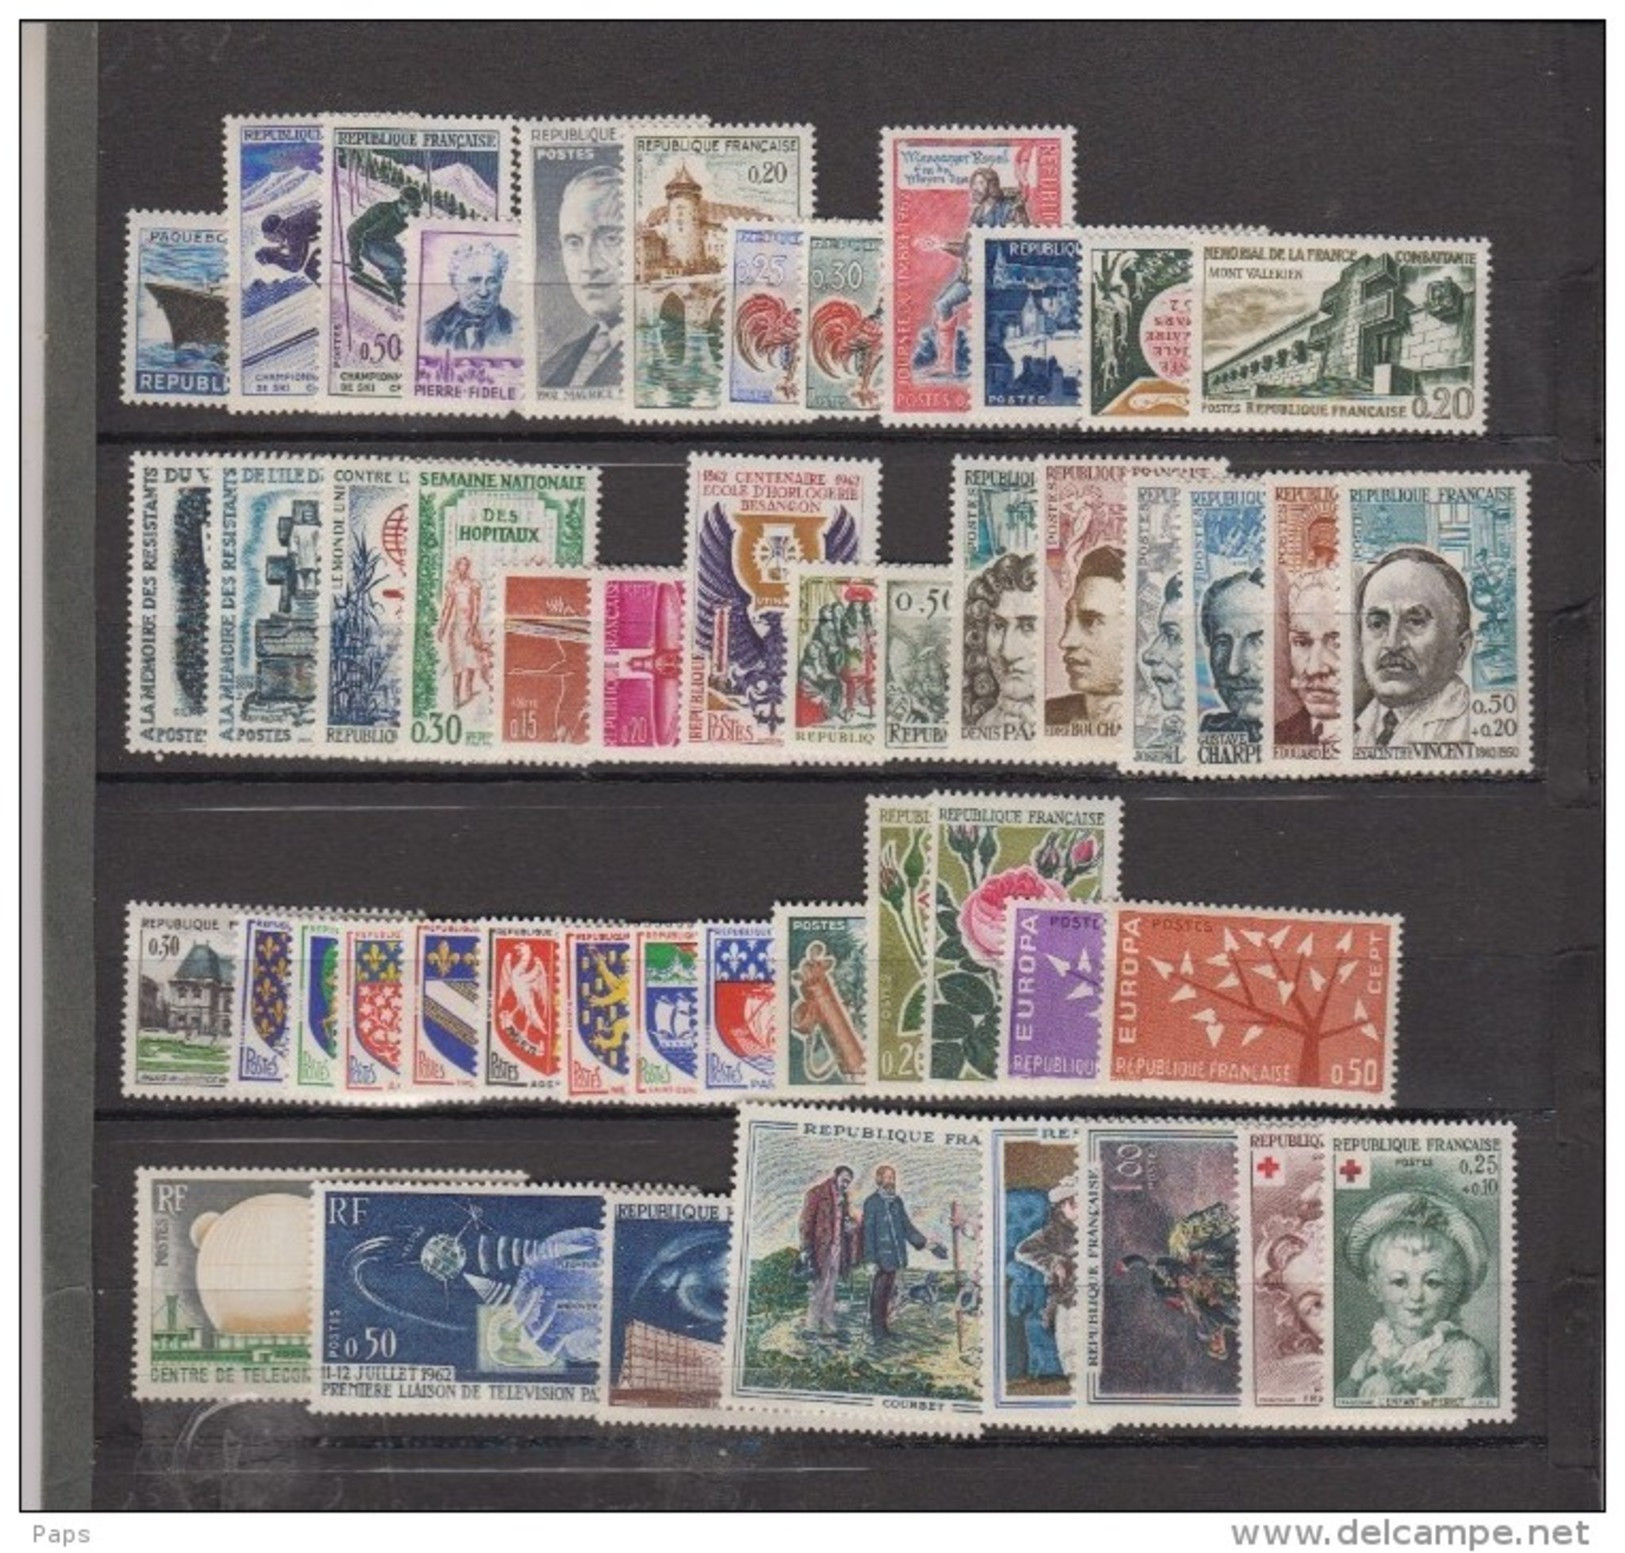 1962-FRANCE-ANNEE COMPLETE 1962**49 TIMBRES - 1960-1969